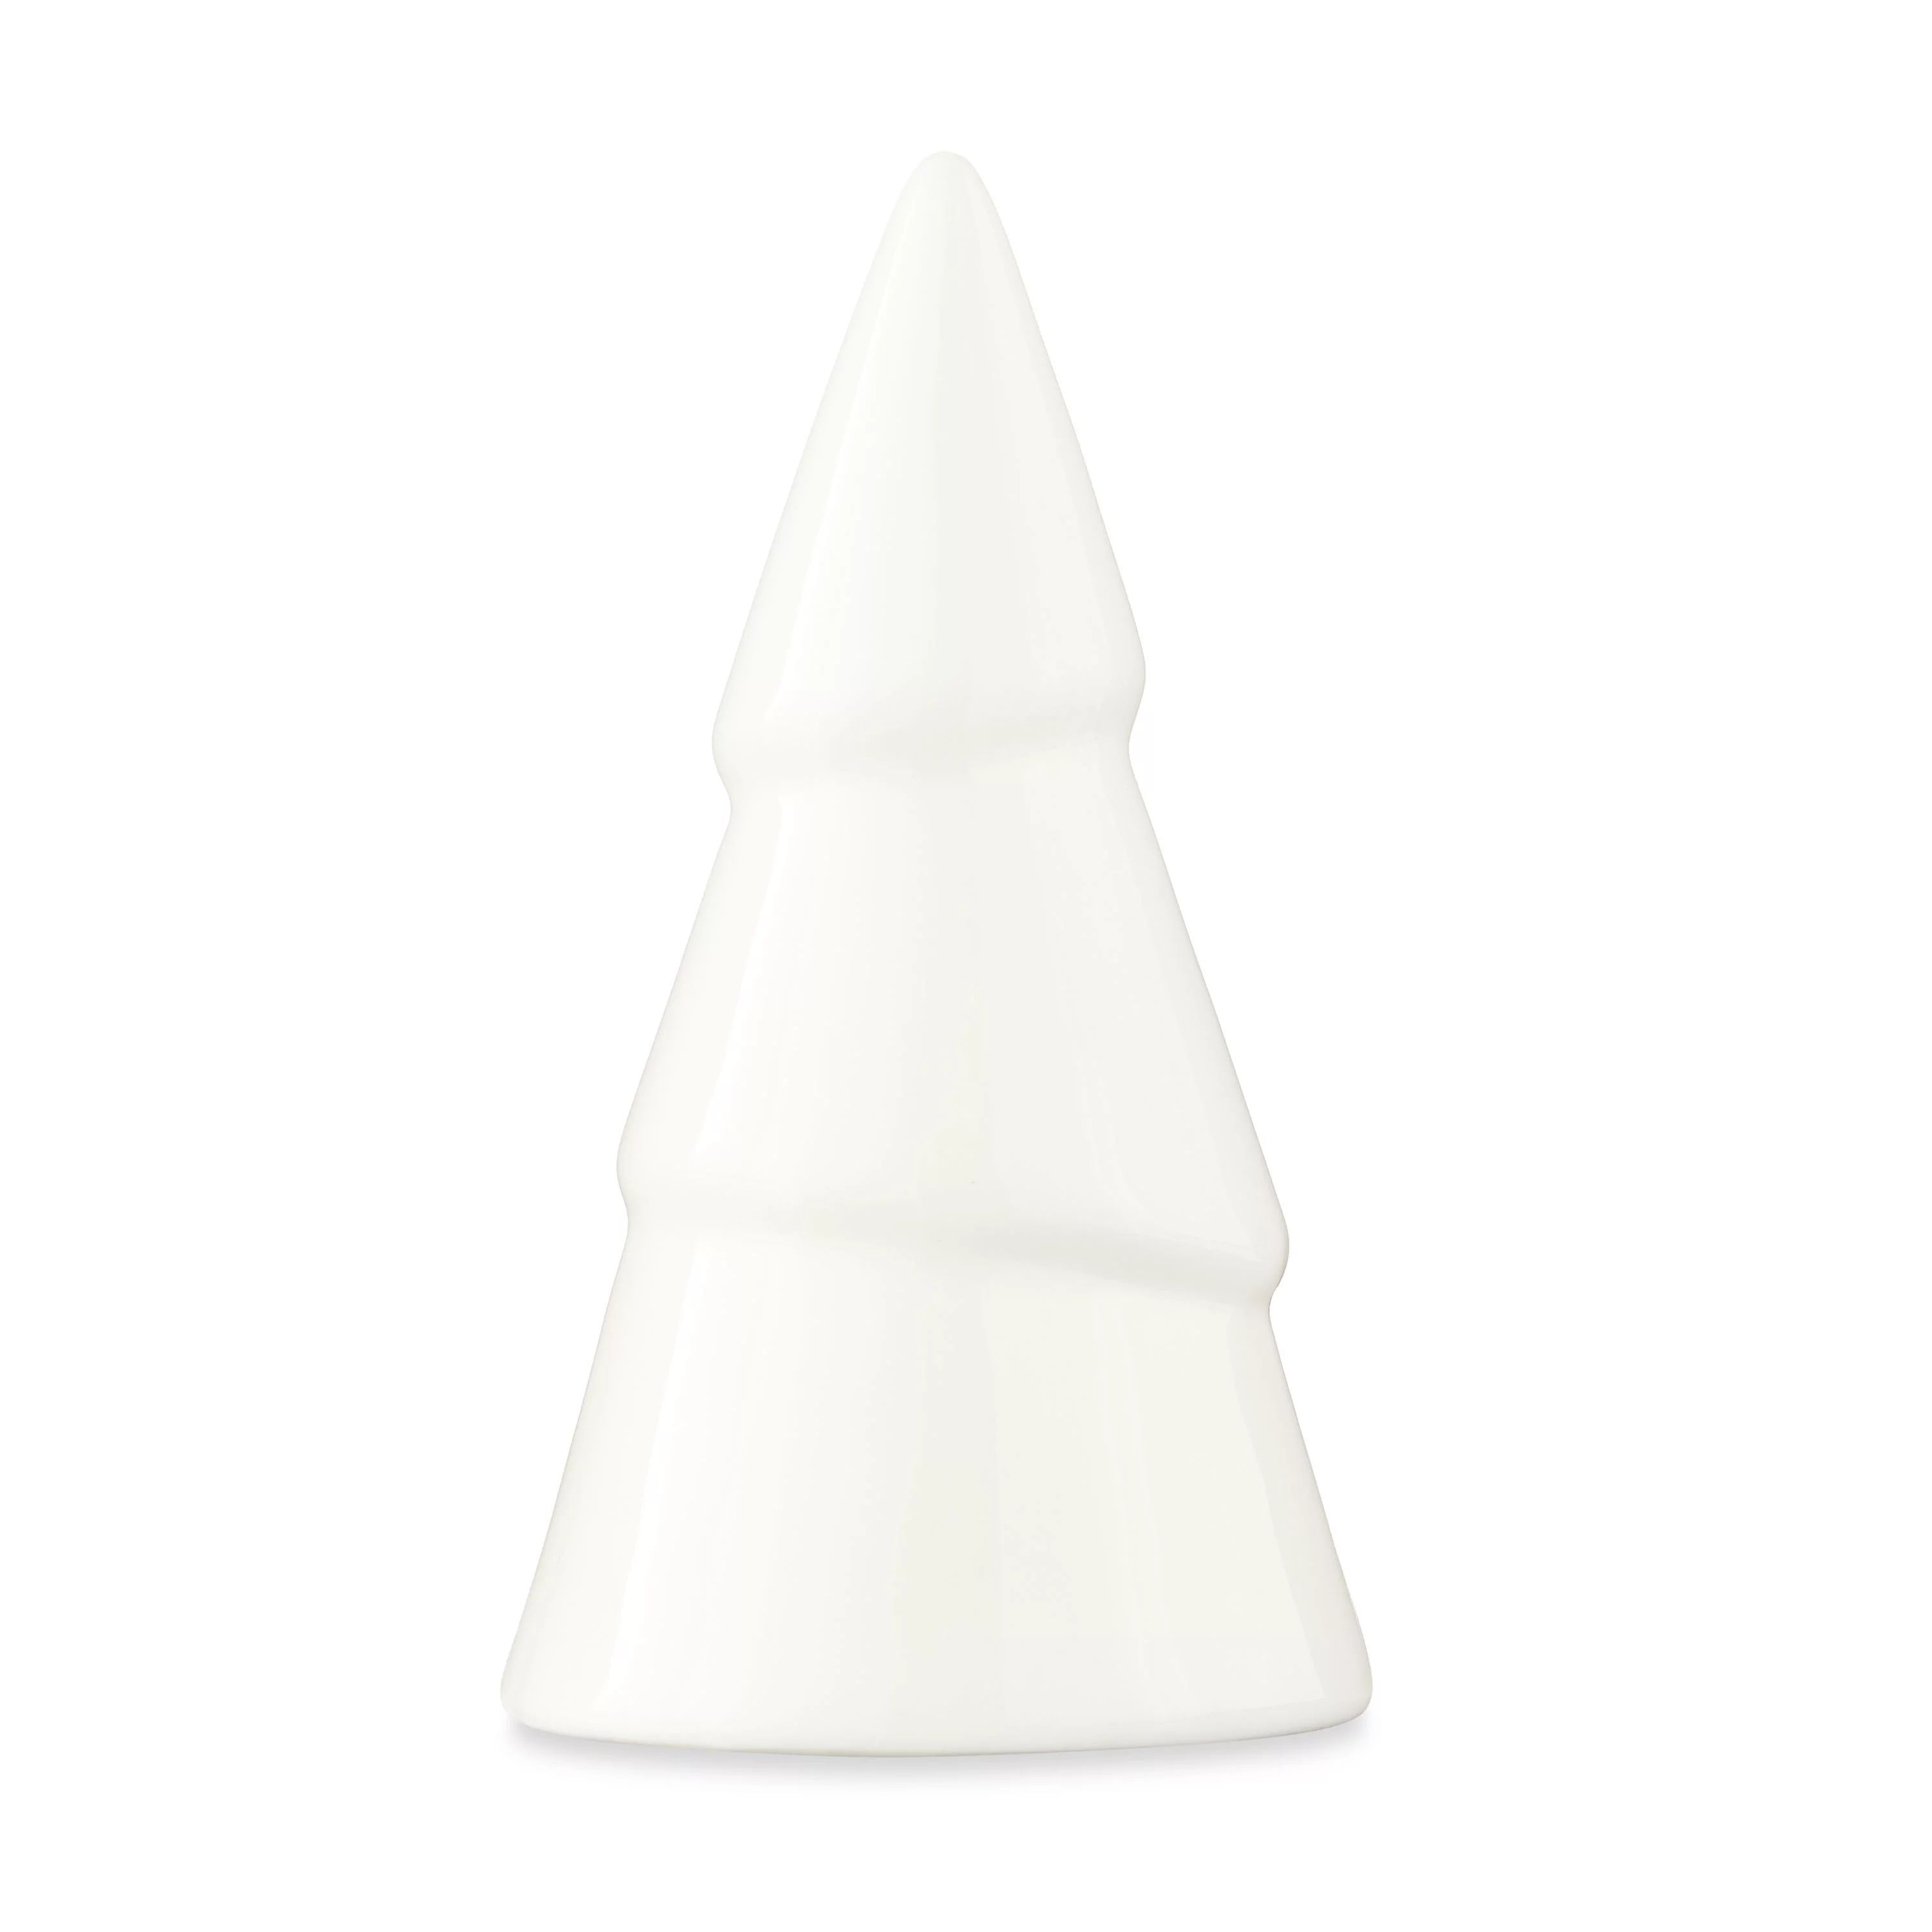 5 in Ceramic Tree Tabletop Christmas Decoration, White, by Holiday Time | Walmart (US)